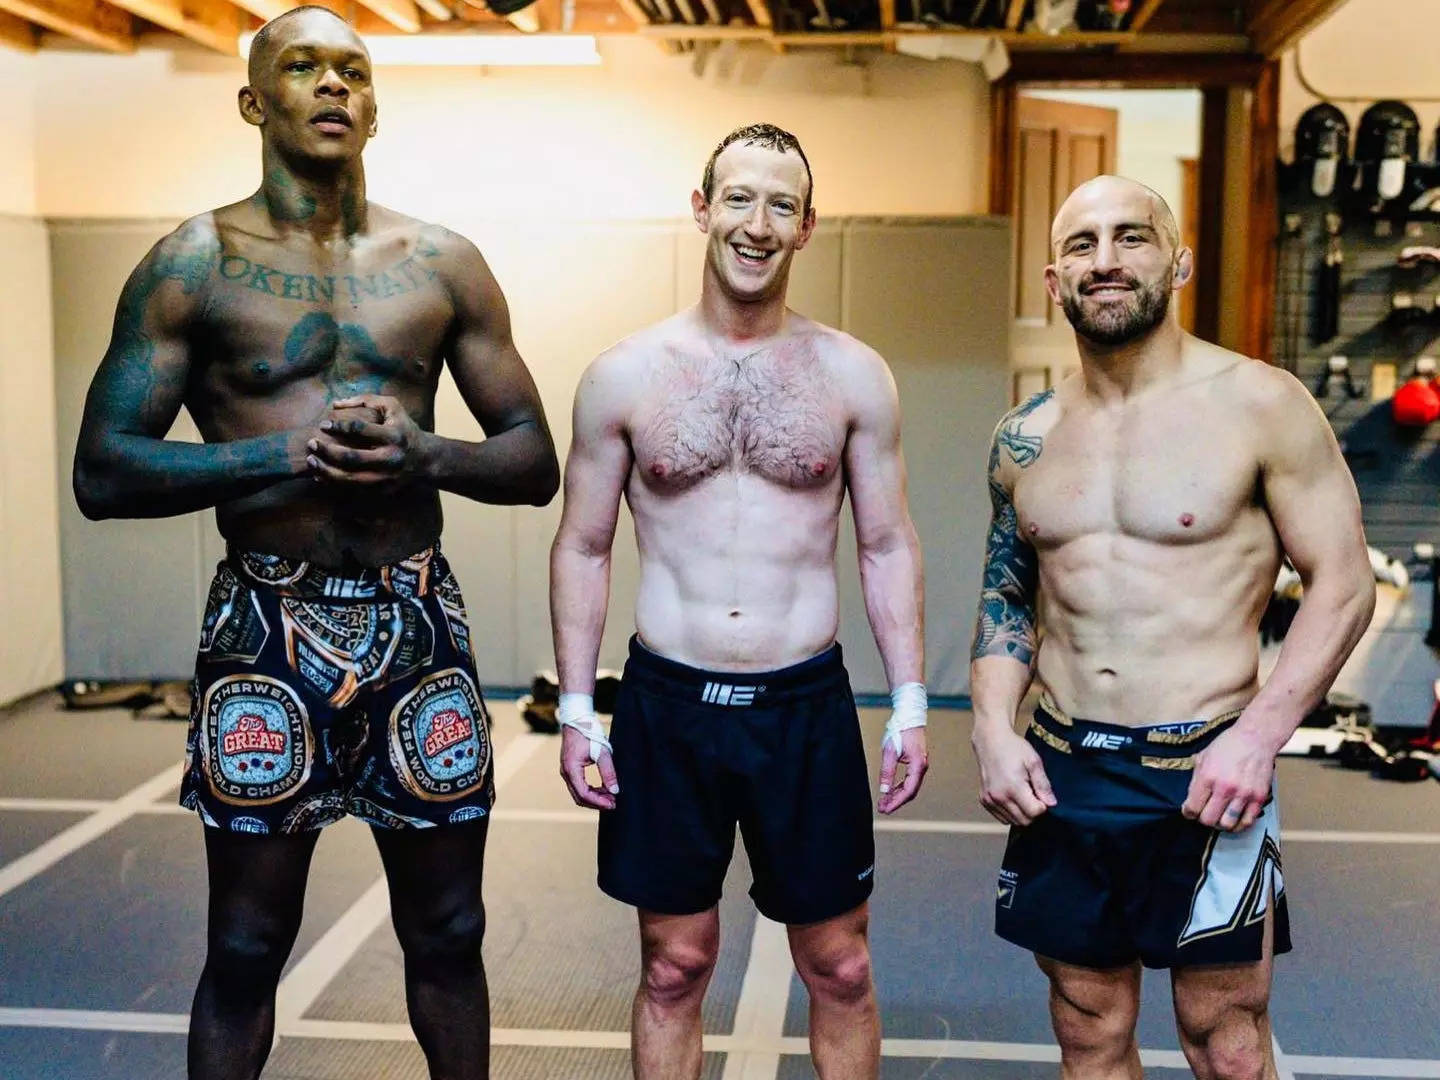 Its Shirtless Tech Bro Summer Jeff Bezos Joins The Crowd After His Fiance Posts A Pic Of Him 3141